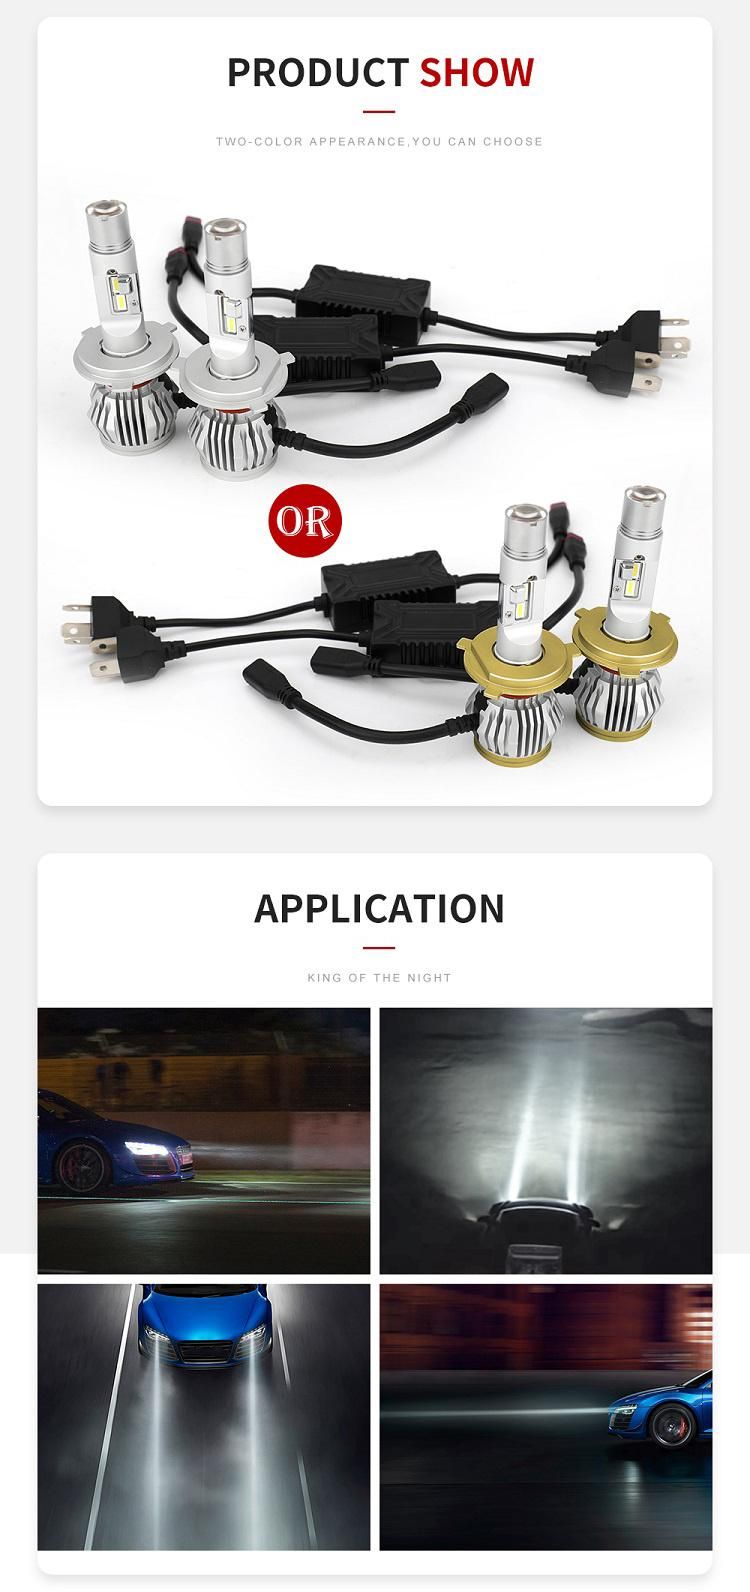 New Arrived Lux @630m H4 H7 H11 9005 9006 Laser LED Headlight for Auto Cars